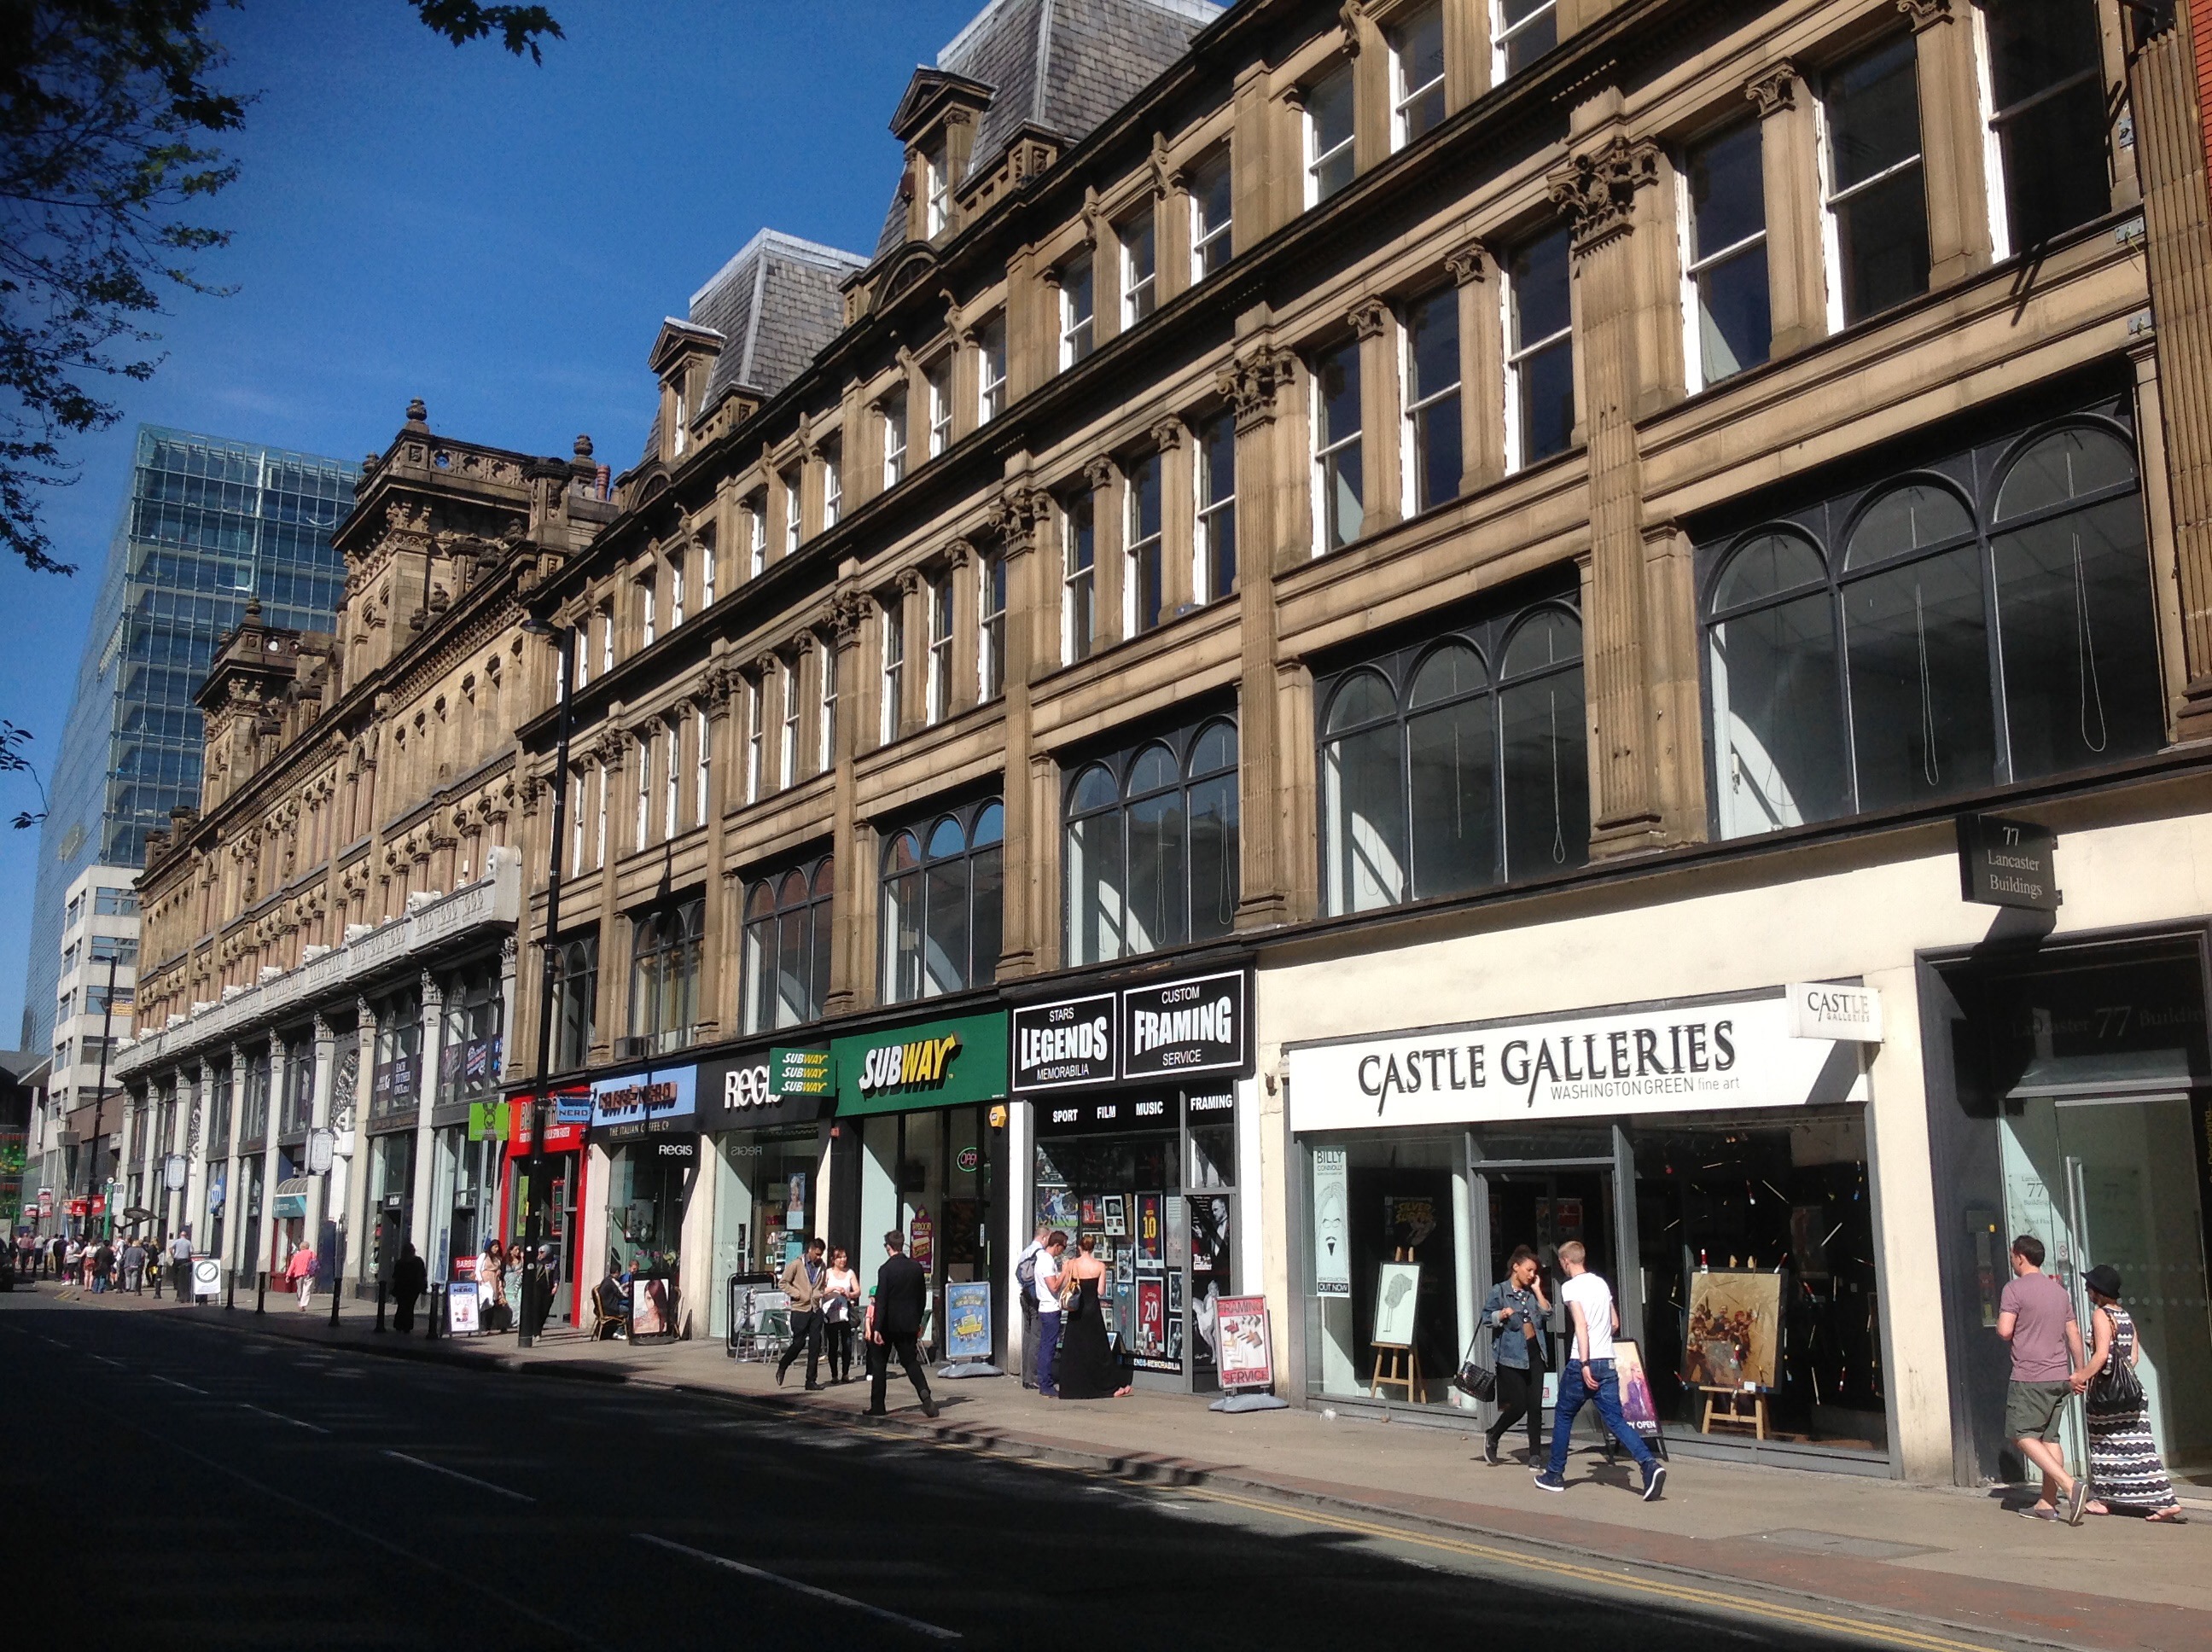 Manchester Study identifies key factors for high street decline - About